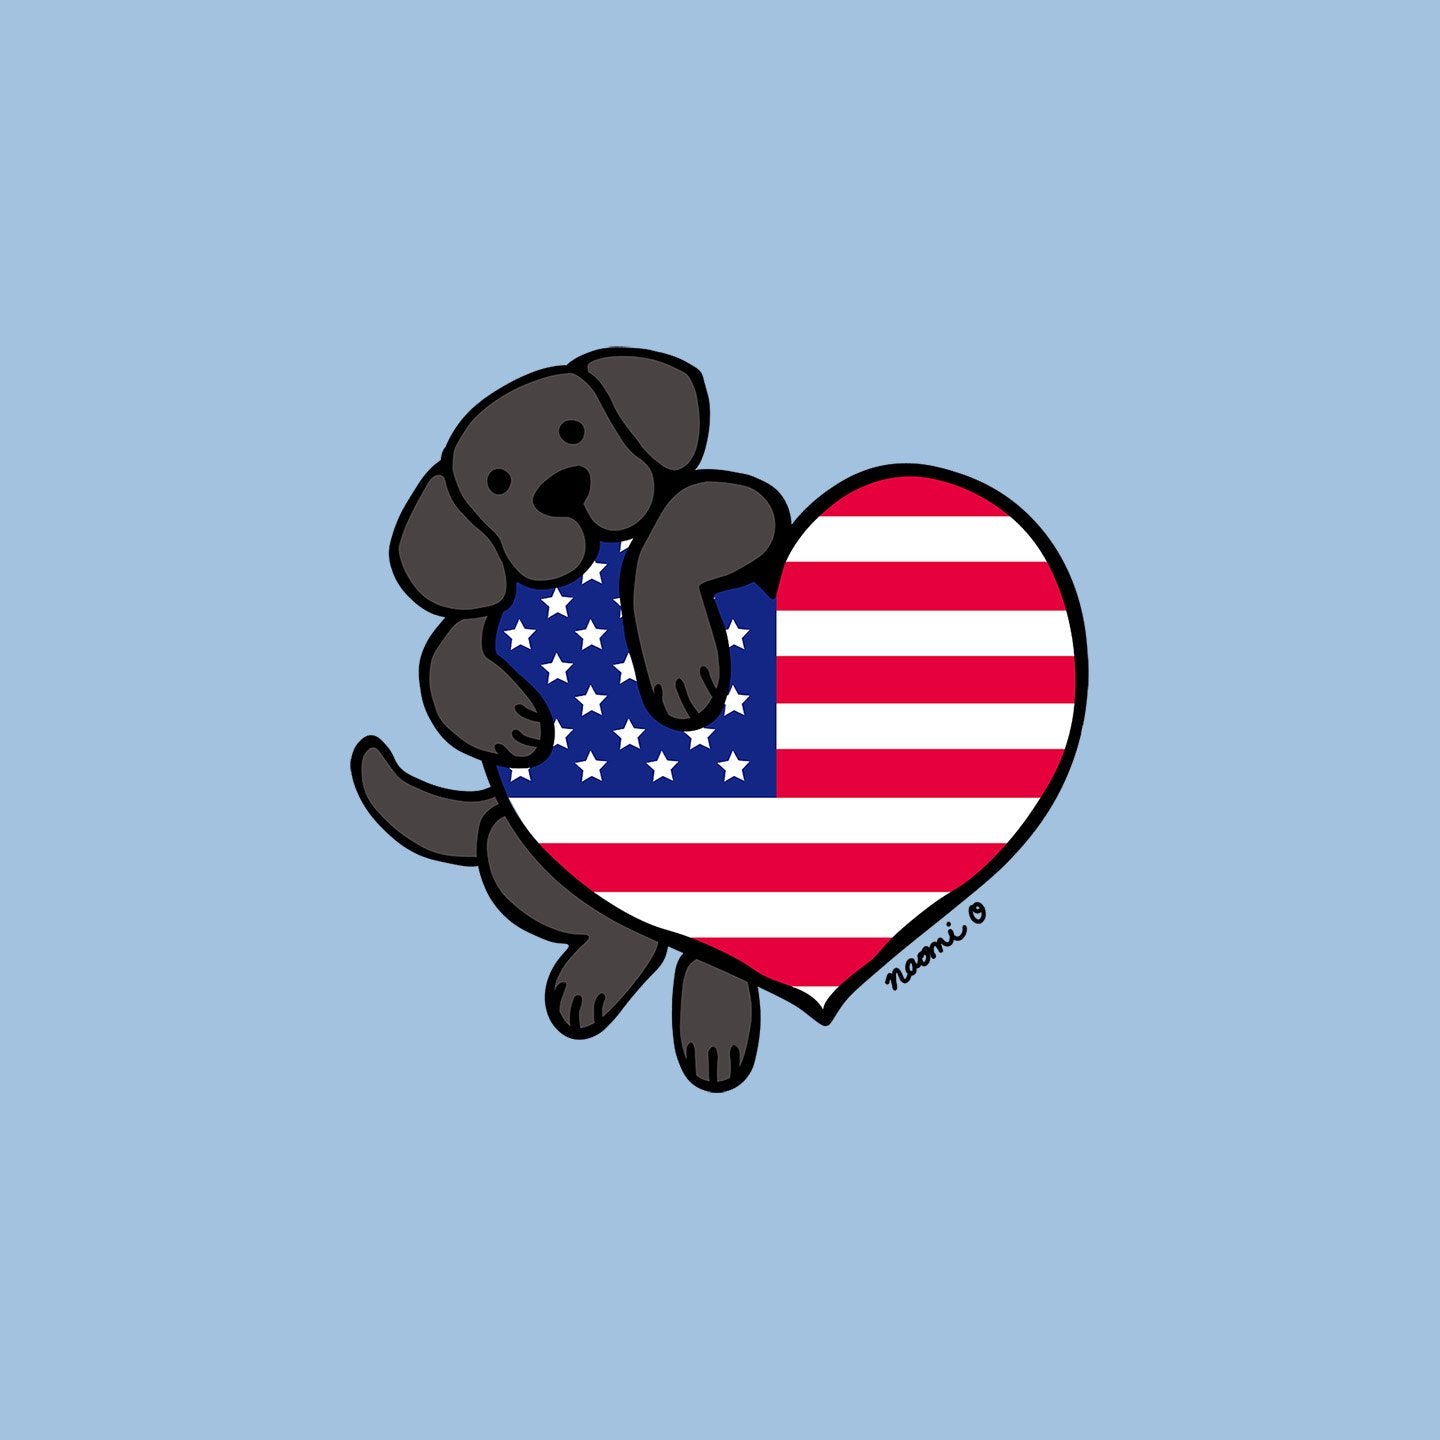 Black Lab USA Flag Heart Left Chest - Women's Fitted T-Shirt